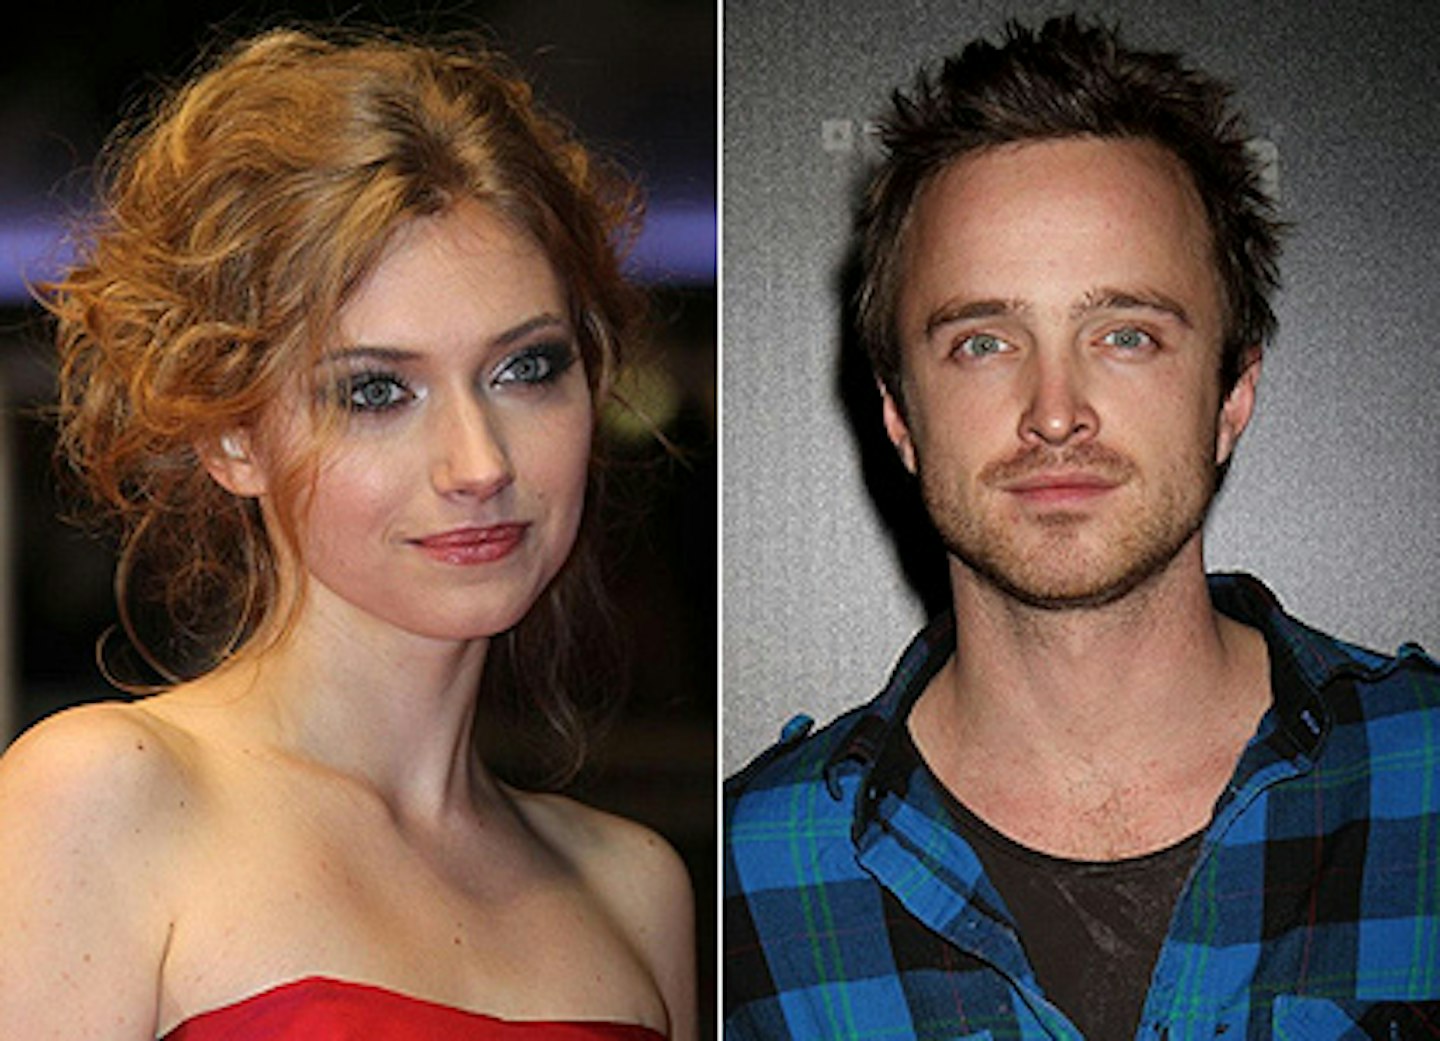 Need for Speed' Review: Aaron Paul Gets Behind the Wheel